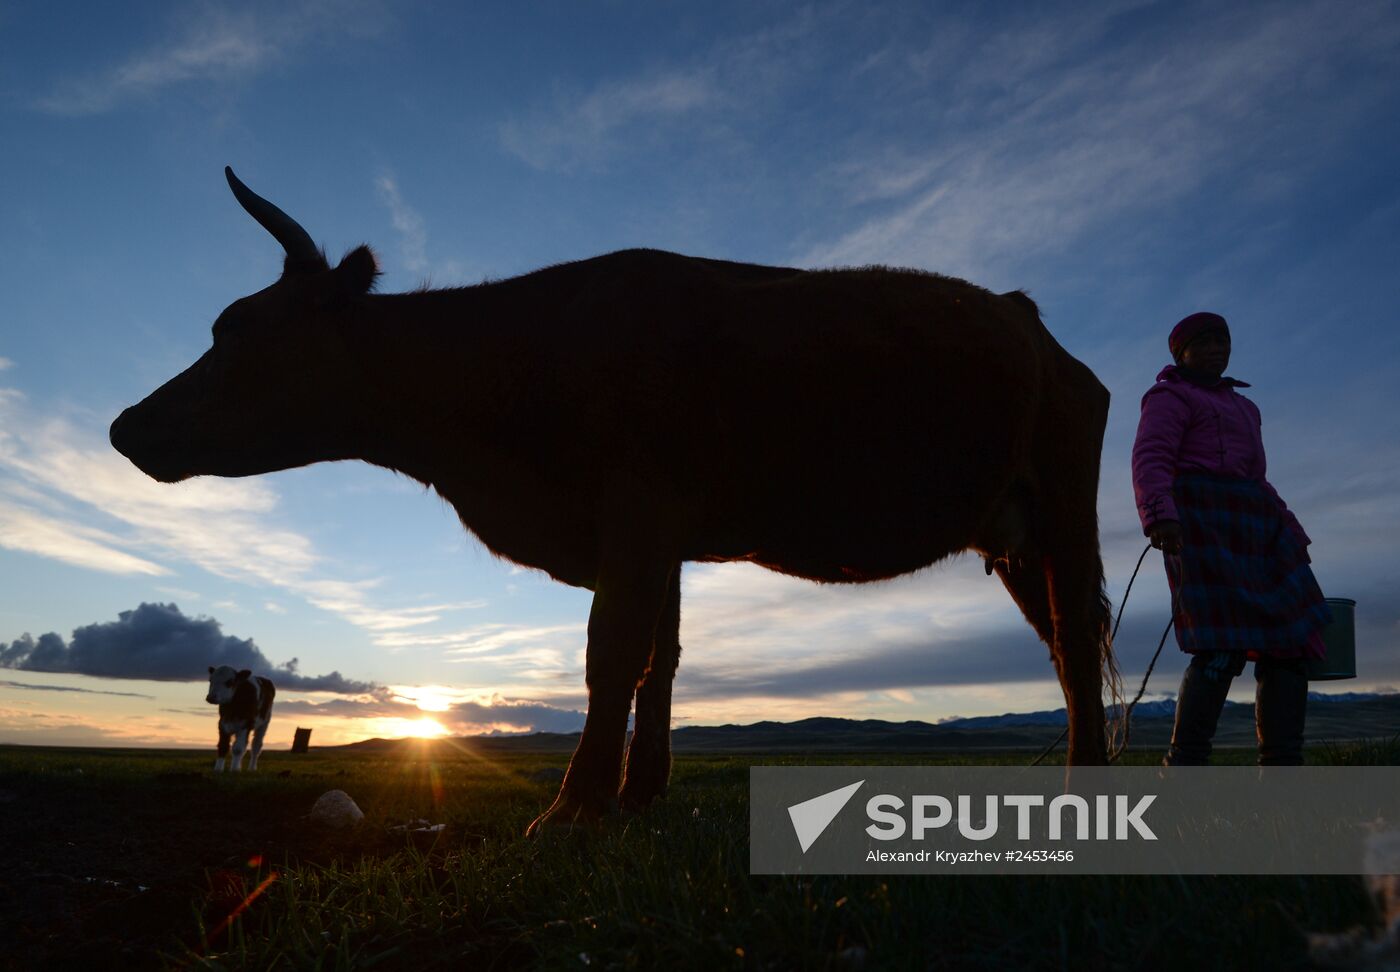 Life of shepherds in the Altai Republic